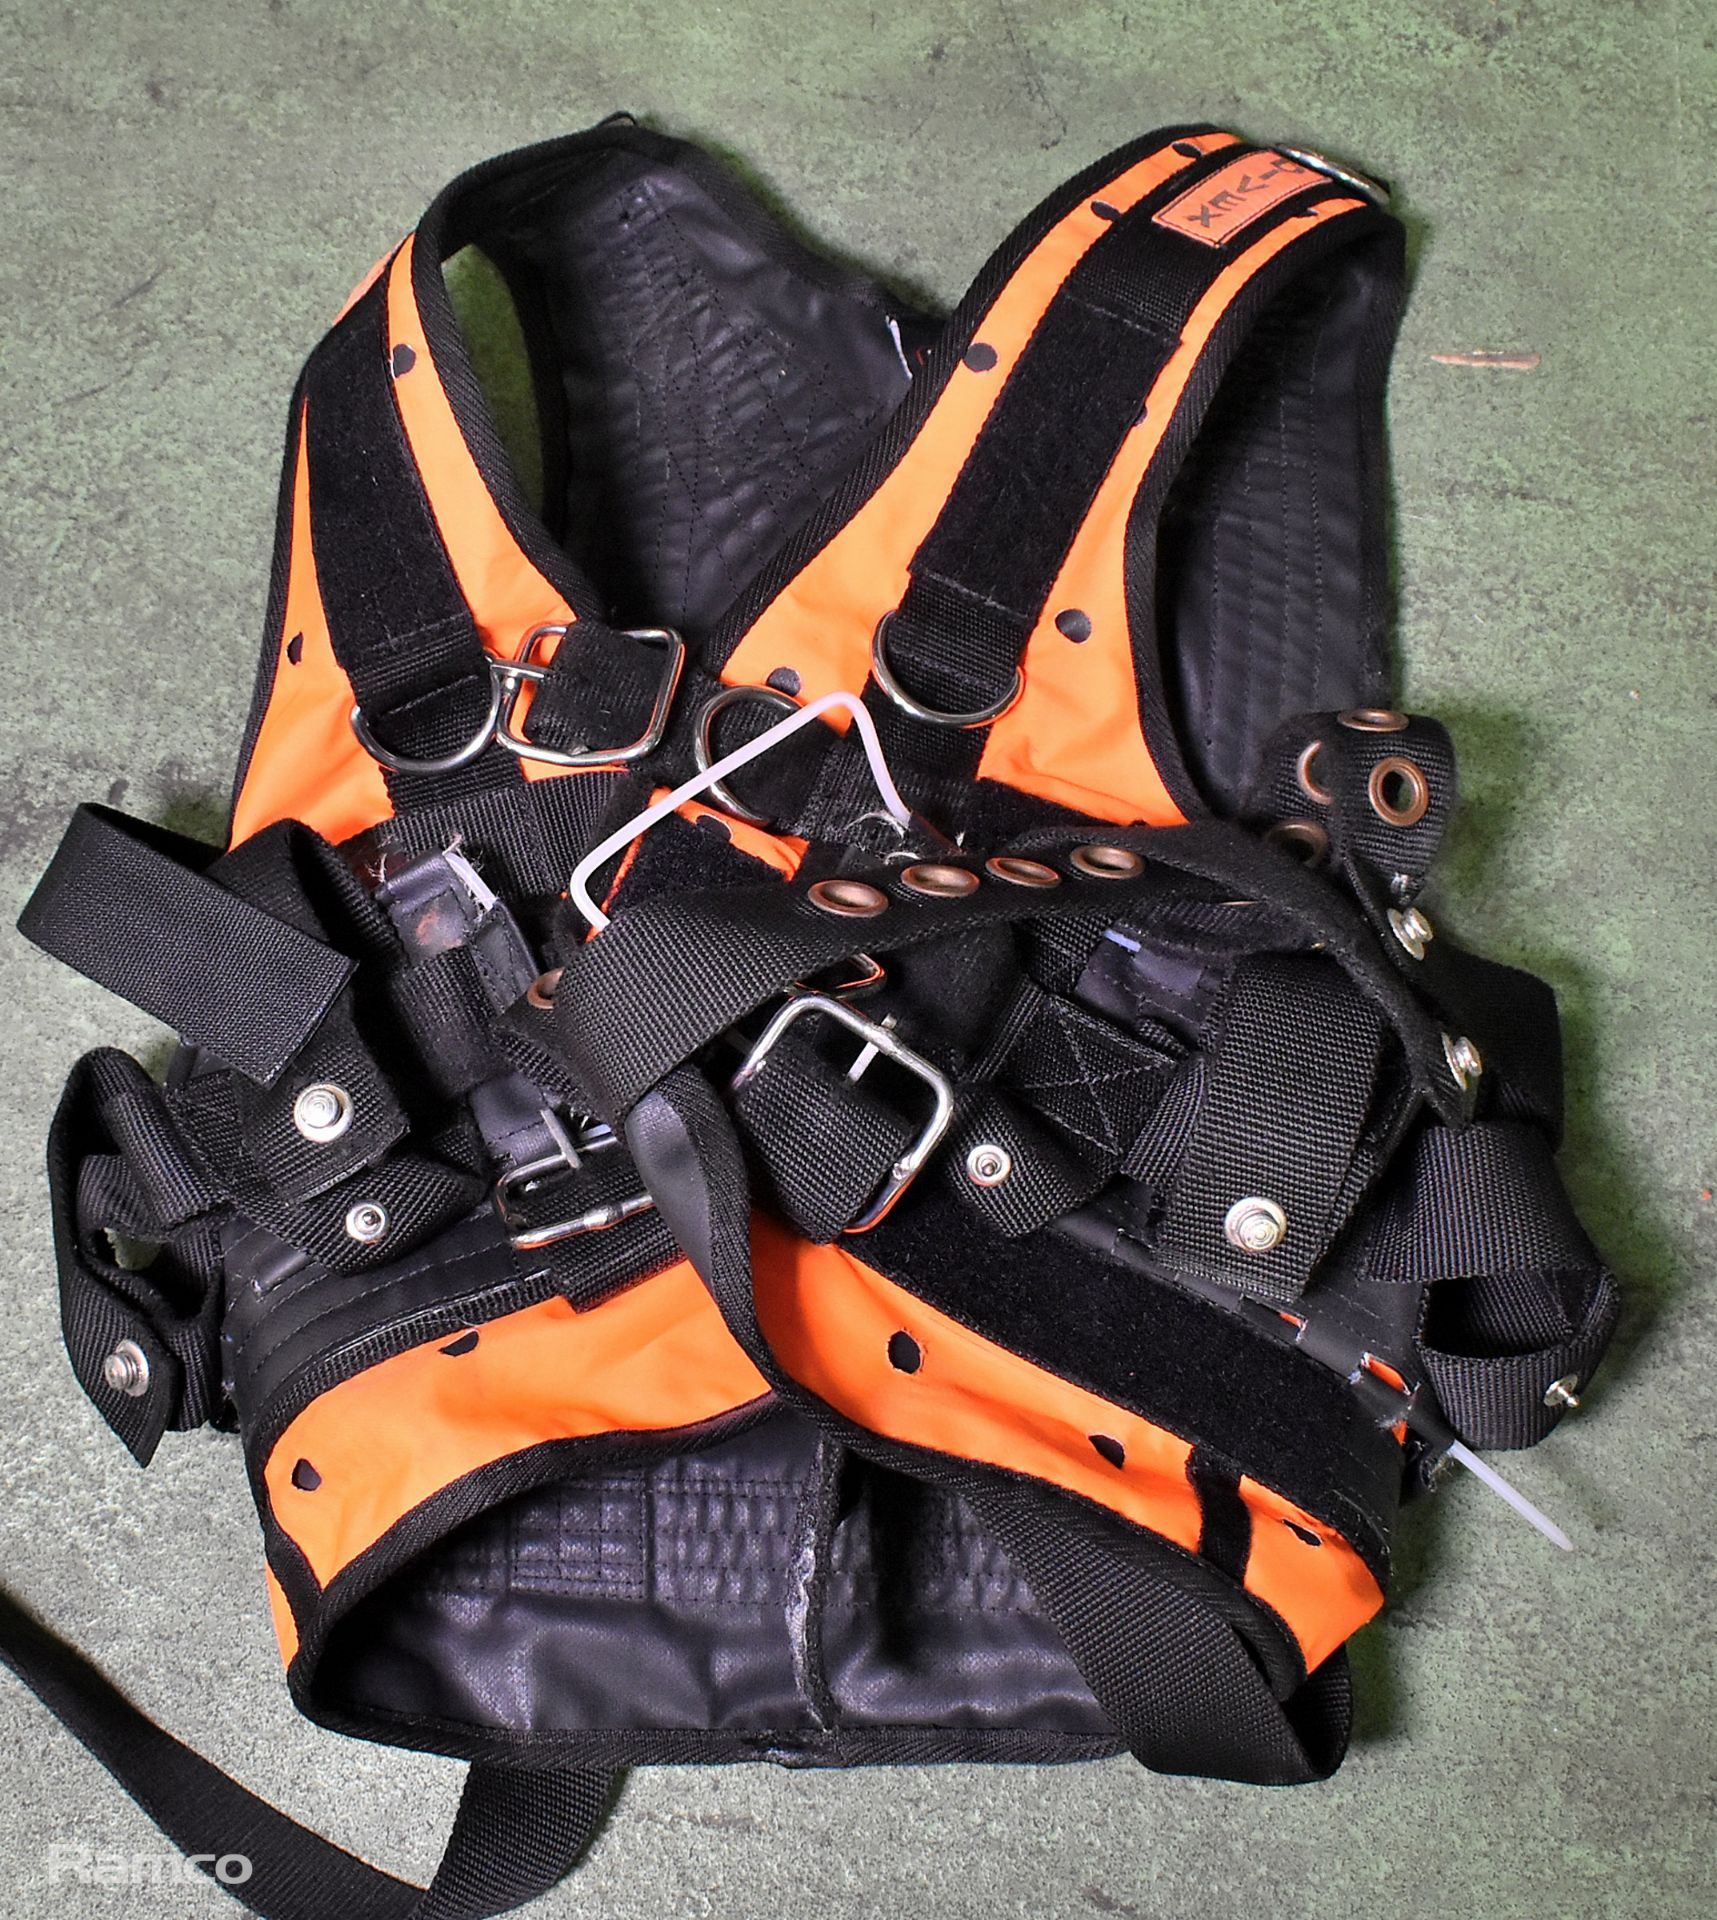 2x Northern Diver R-Vest harnesses - Manufacture Date: August 2017 - MAY REQUIRE CALIBRATION - Image 4 of 10